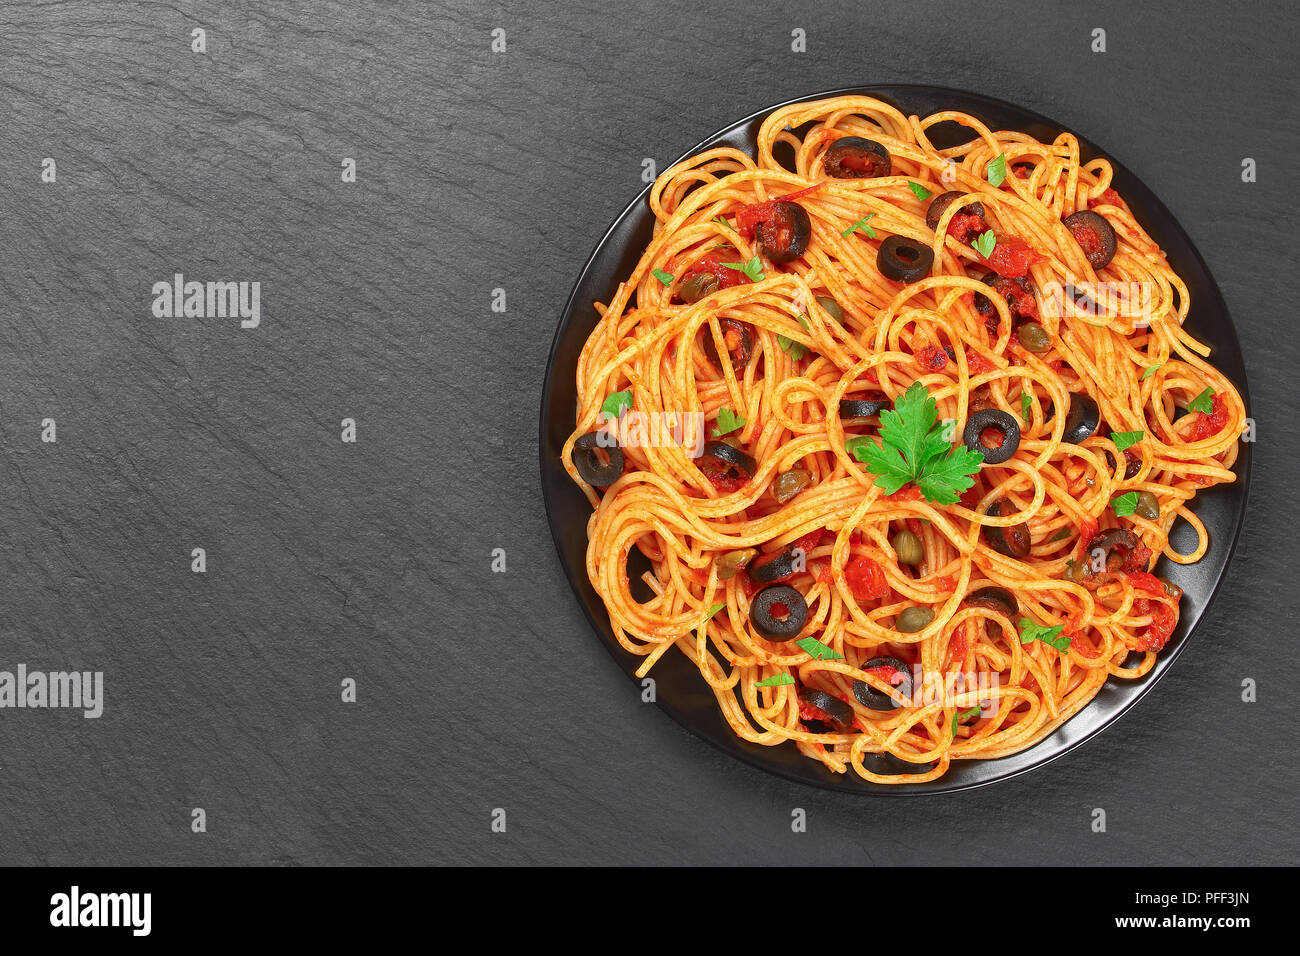 Delicious Spaghetti alla puttanesca with capers. olives, anchovies, tomato sauce sprinkled with parsley on black plate on stone tray, authentic basic  Stock Photo